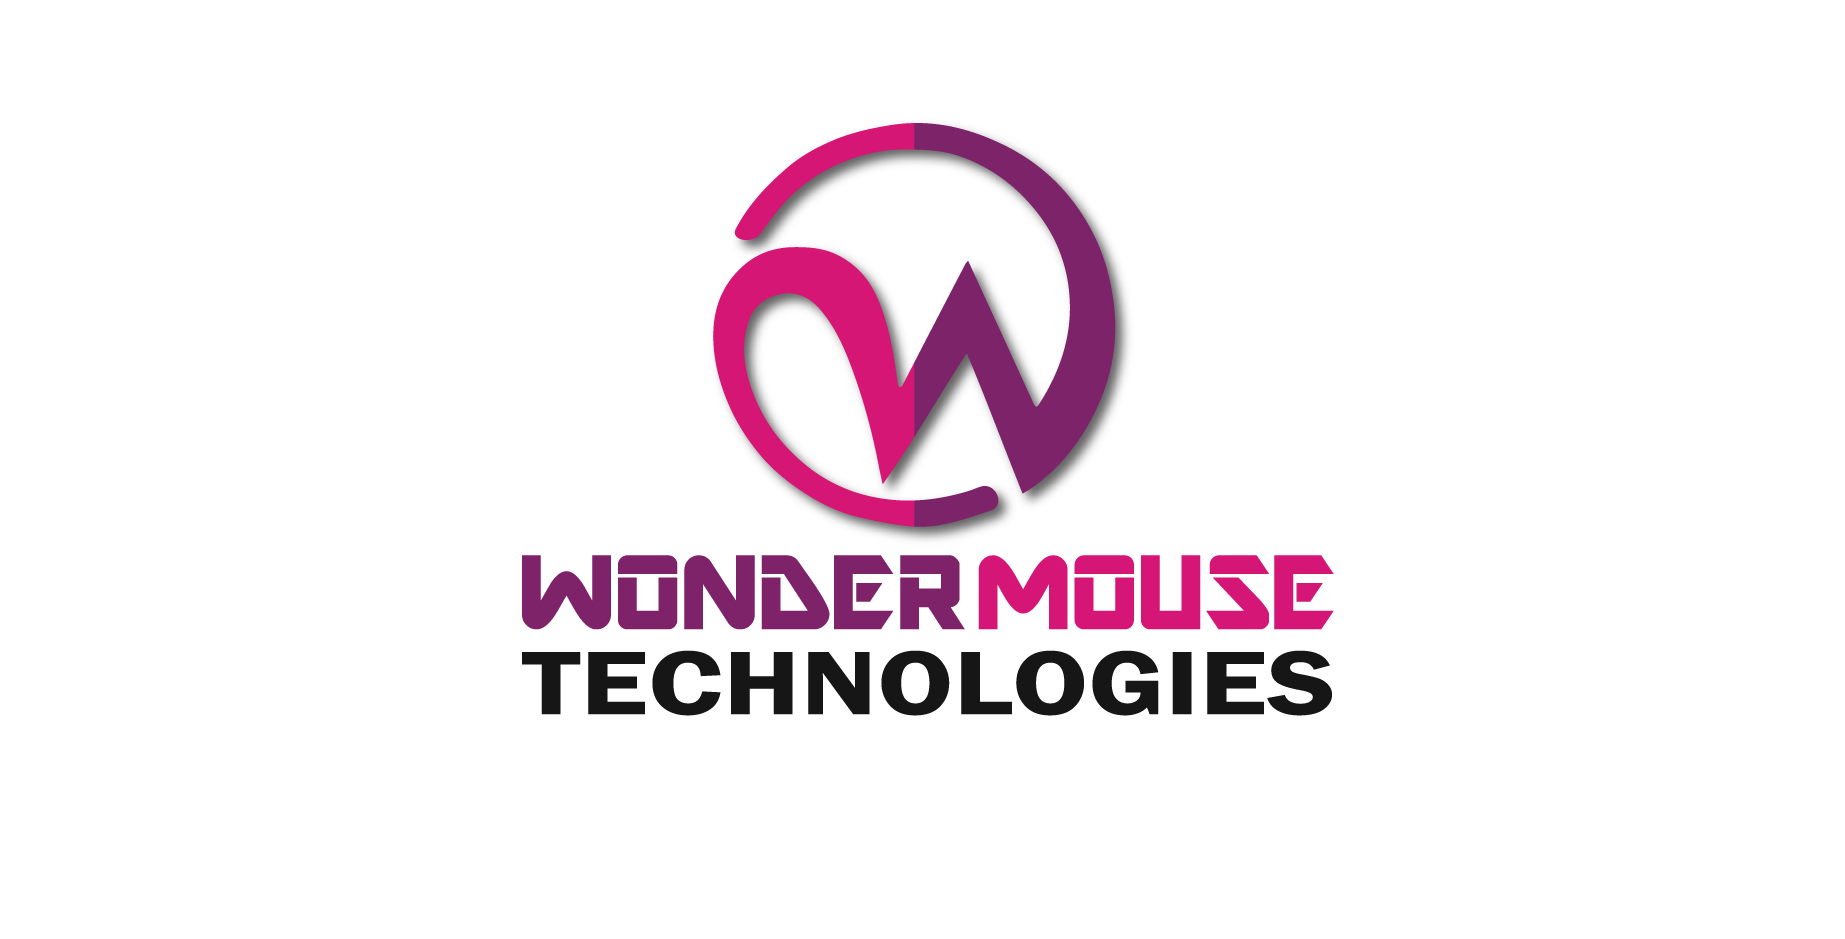 WonderMouse Technologies Pvt Ltd profile on Qualified.One